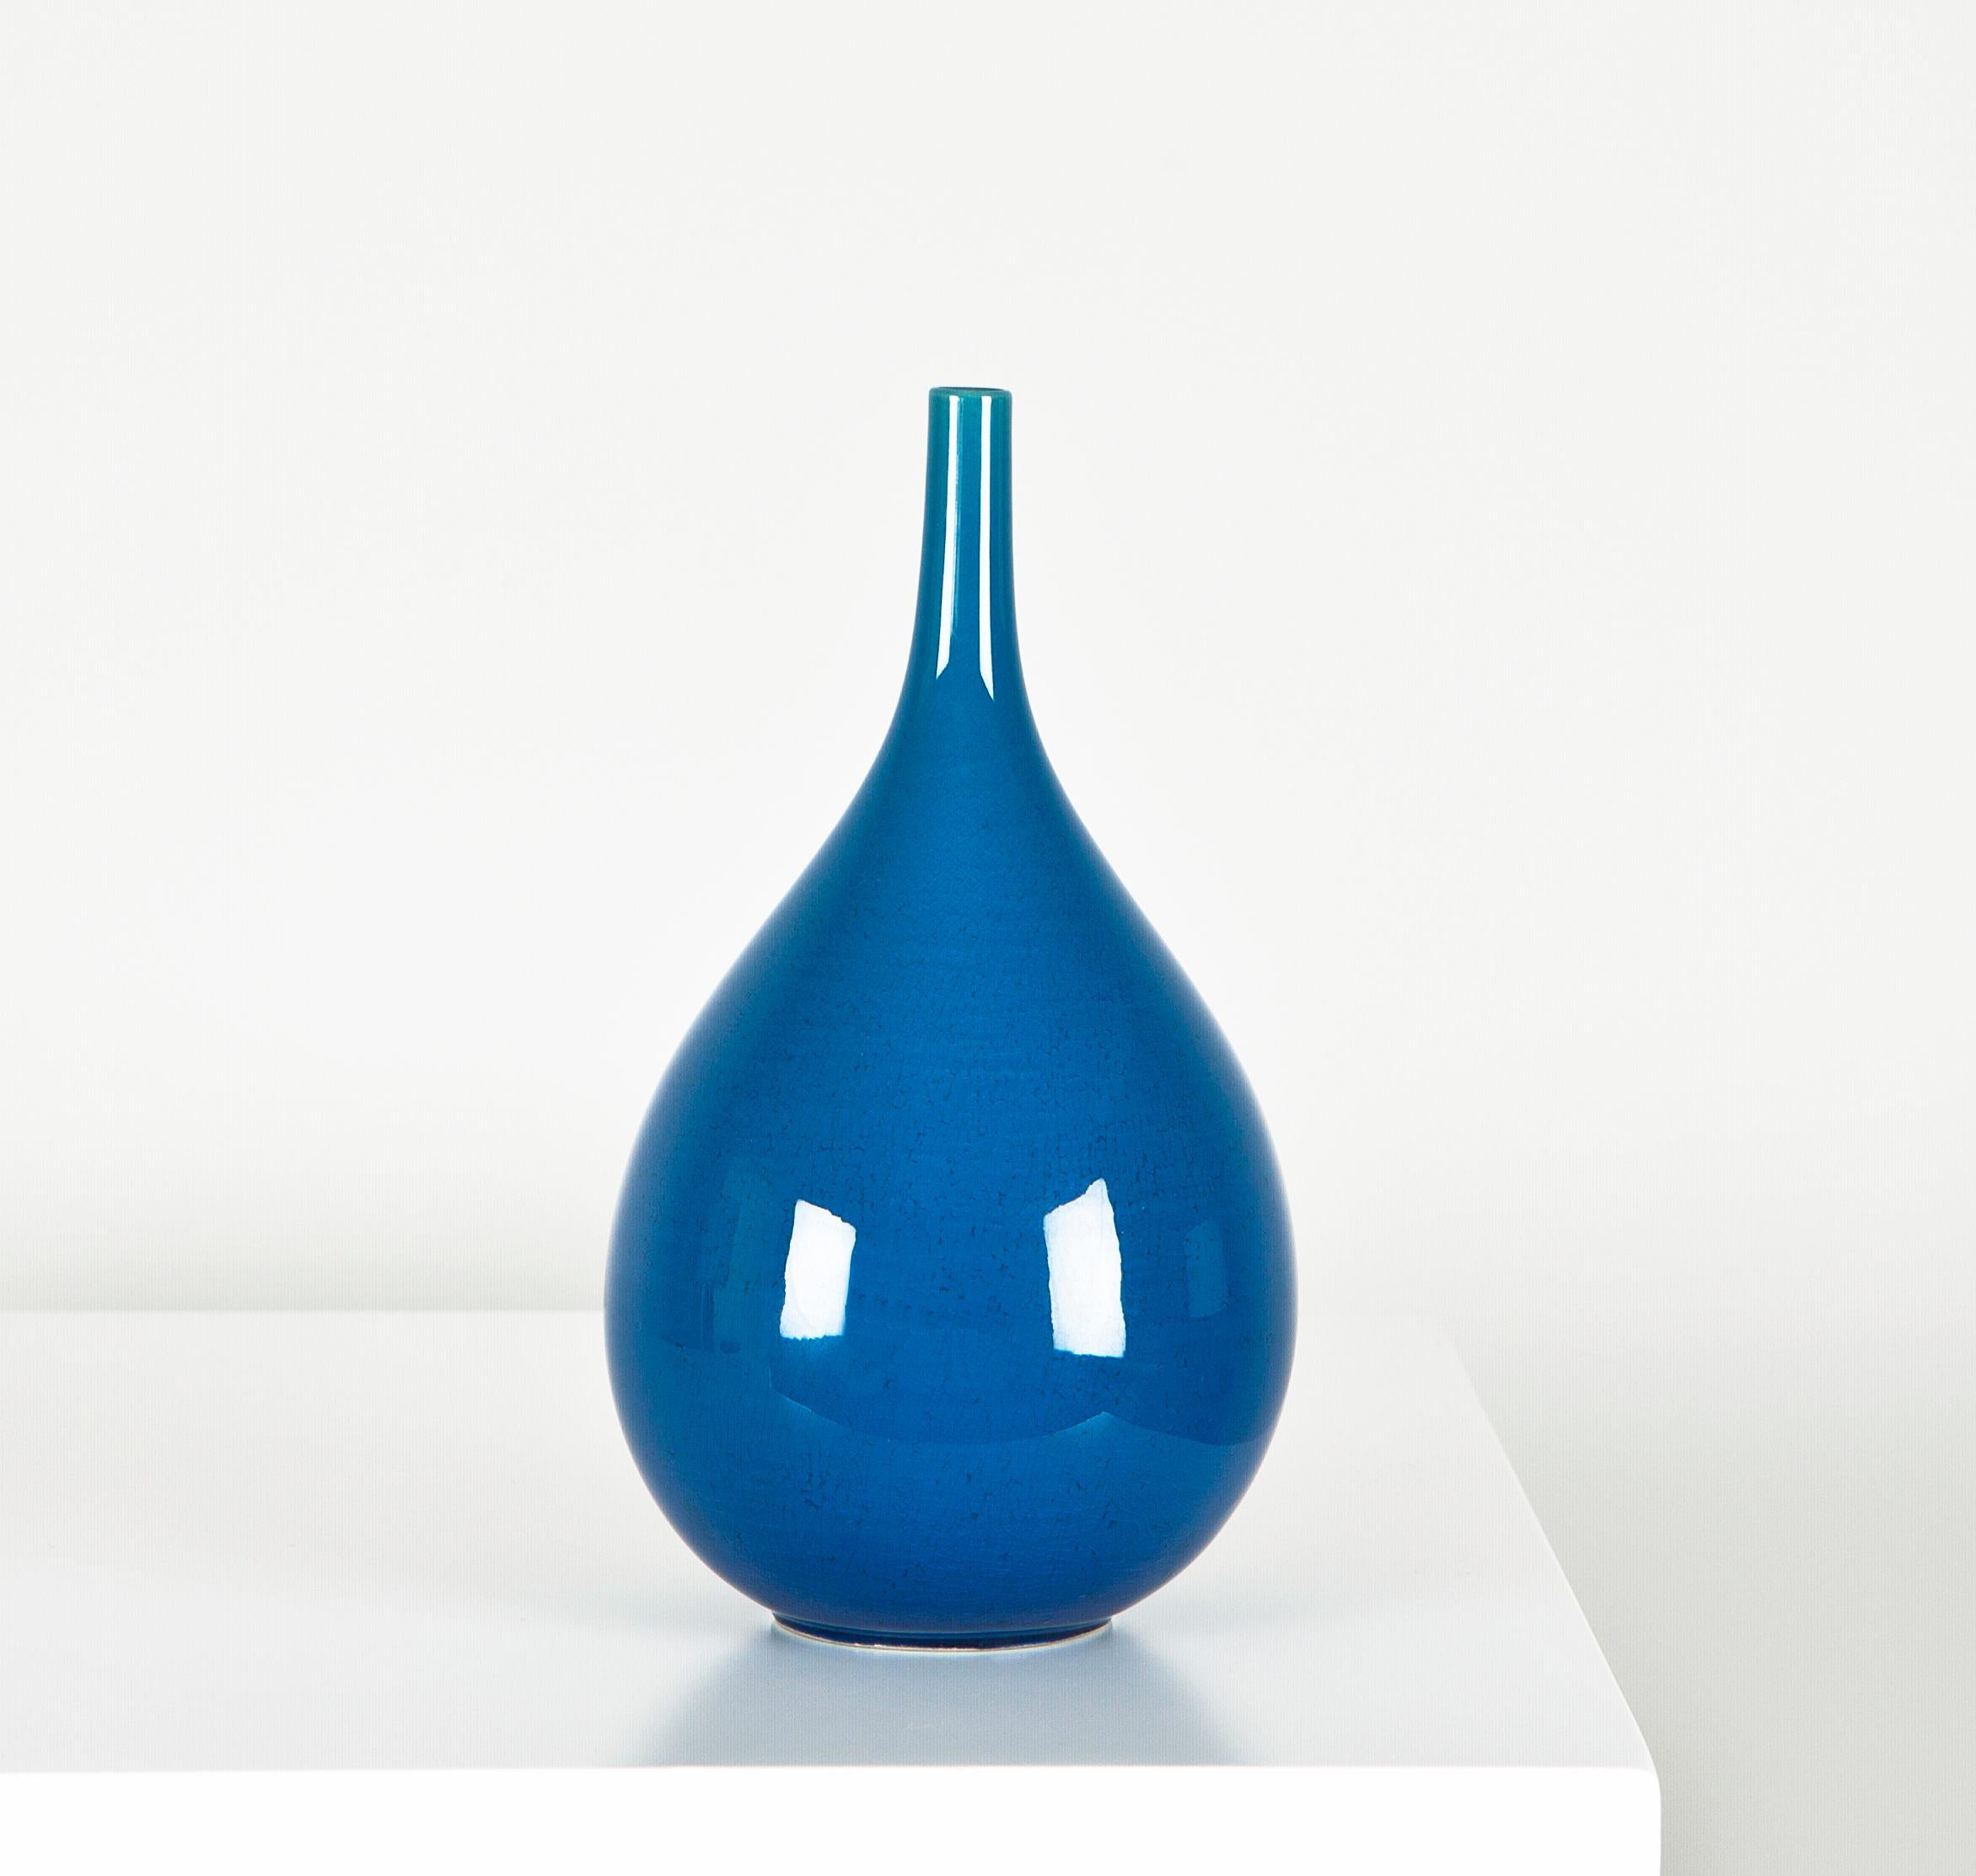 Raindrop Enameled Stoneware Vase by Carl-Harry Stålhane for Rörstrand. Sweden, 1950s.
Very good condition. vintage product without defects.